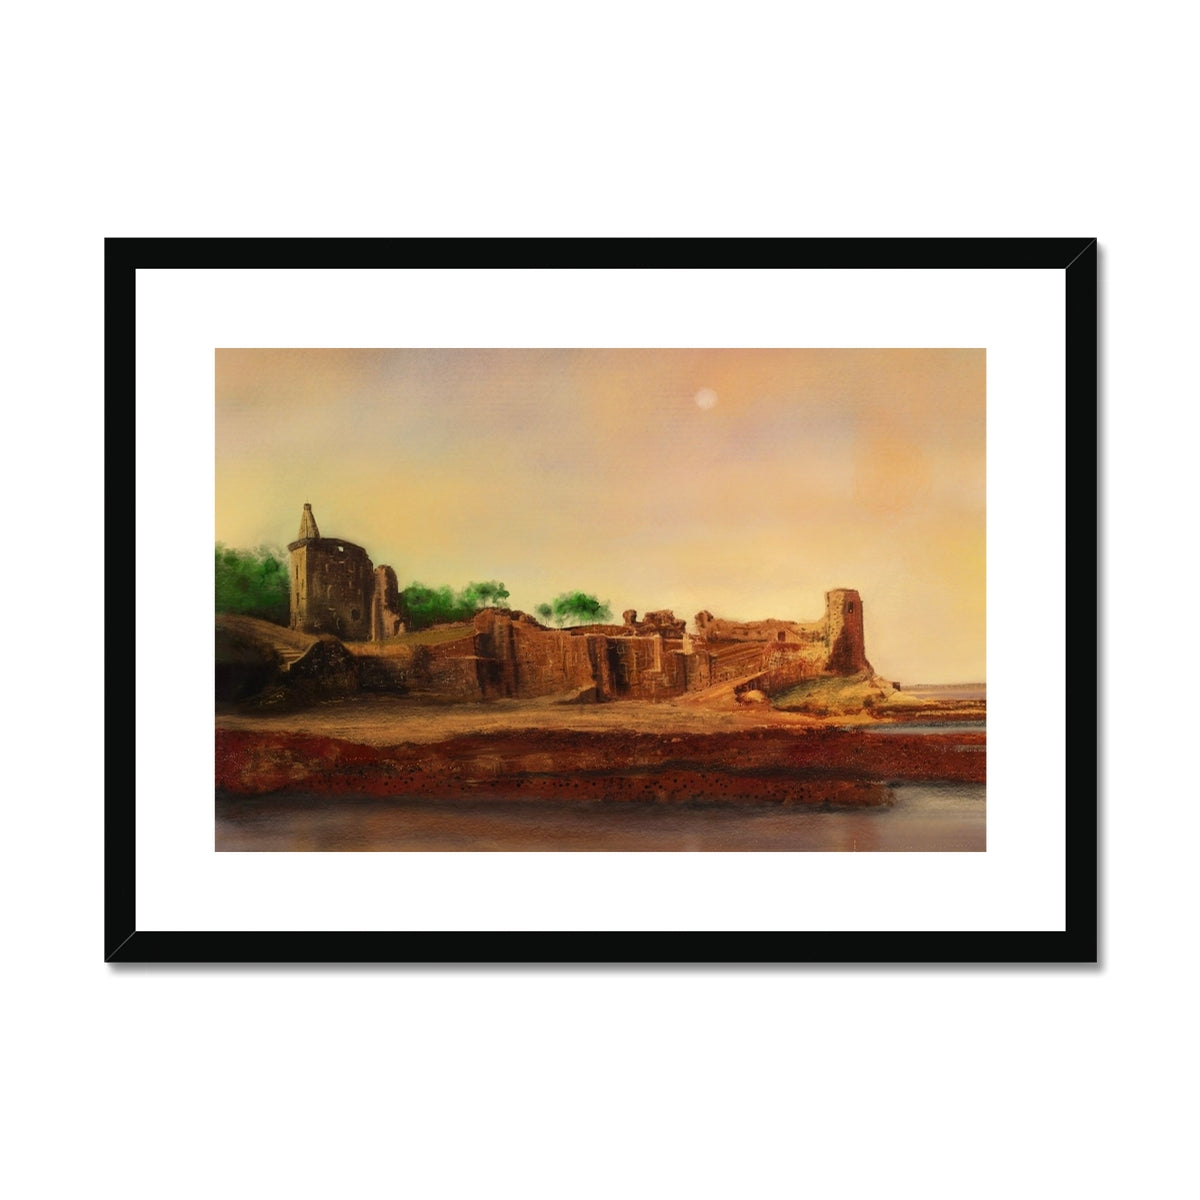 St Andrews Castle Painting | Framed & Mounted Prints From Scotland-Framed & Mounted Prints-Historic & Iconic Scotland Art Gallery-A2 Landscape-Black Frame-Paintings, Prints, Homeware, Art Gifts From Scotland By Scottish Artist Kevin Hunter